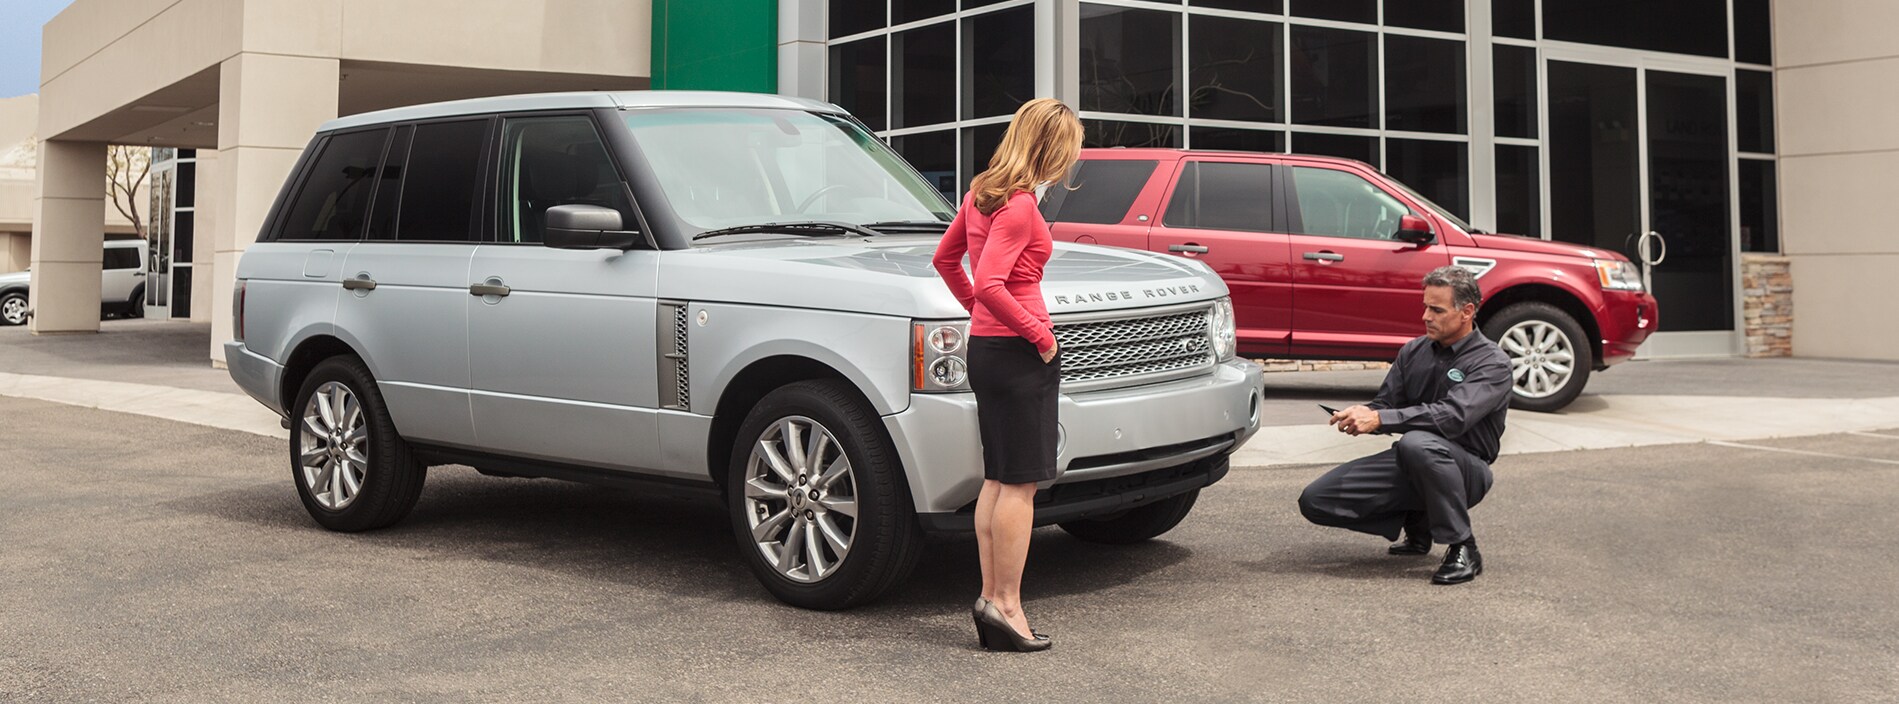 What are the Land Rover Maintenance Schedules? Land